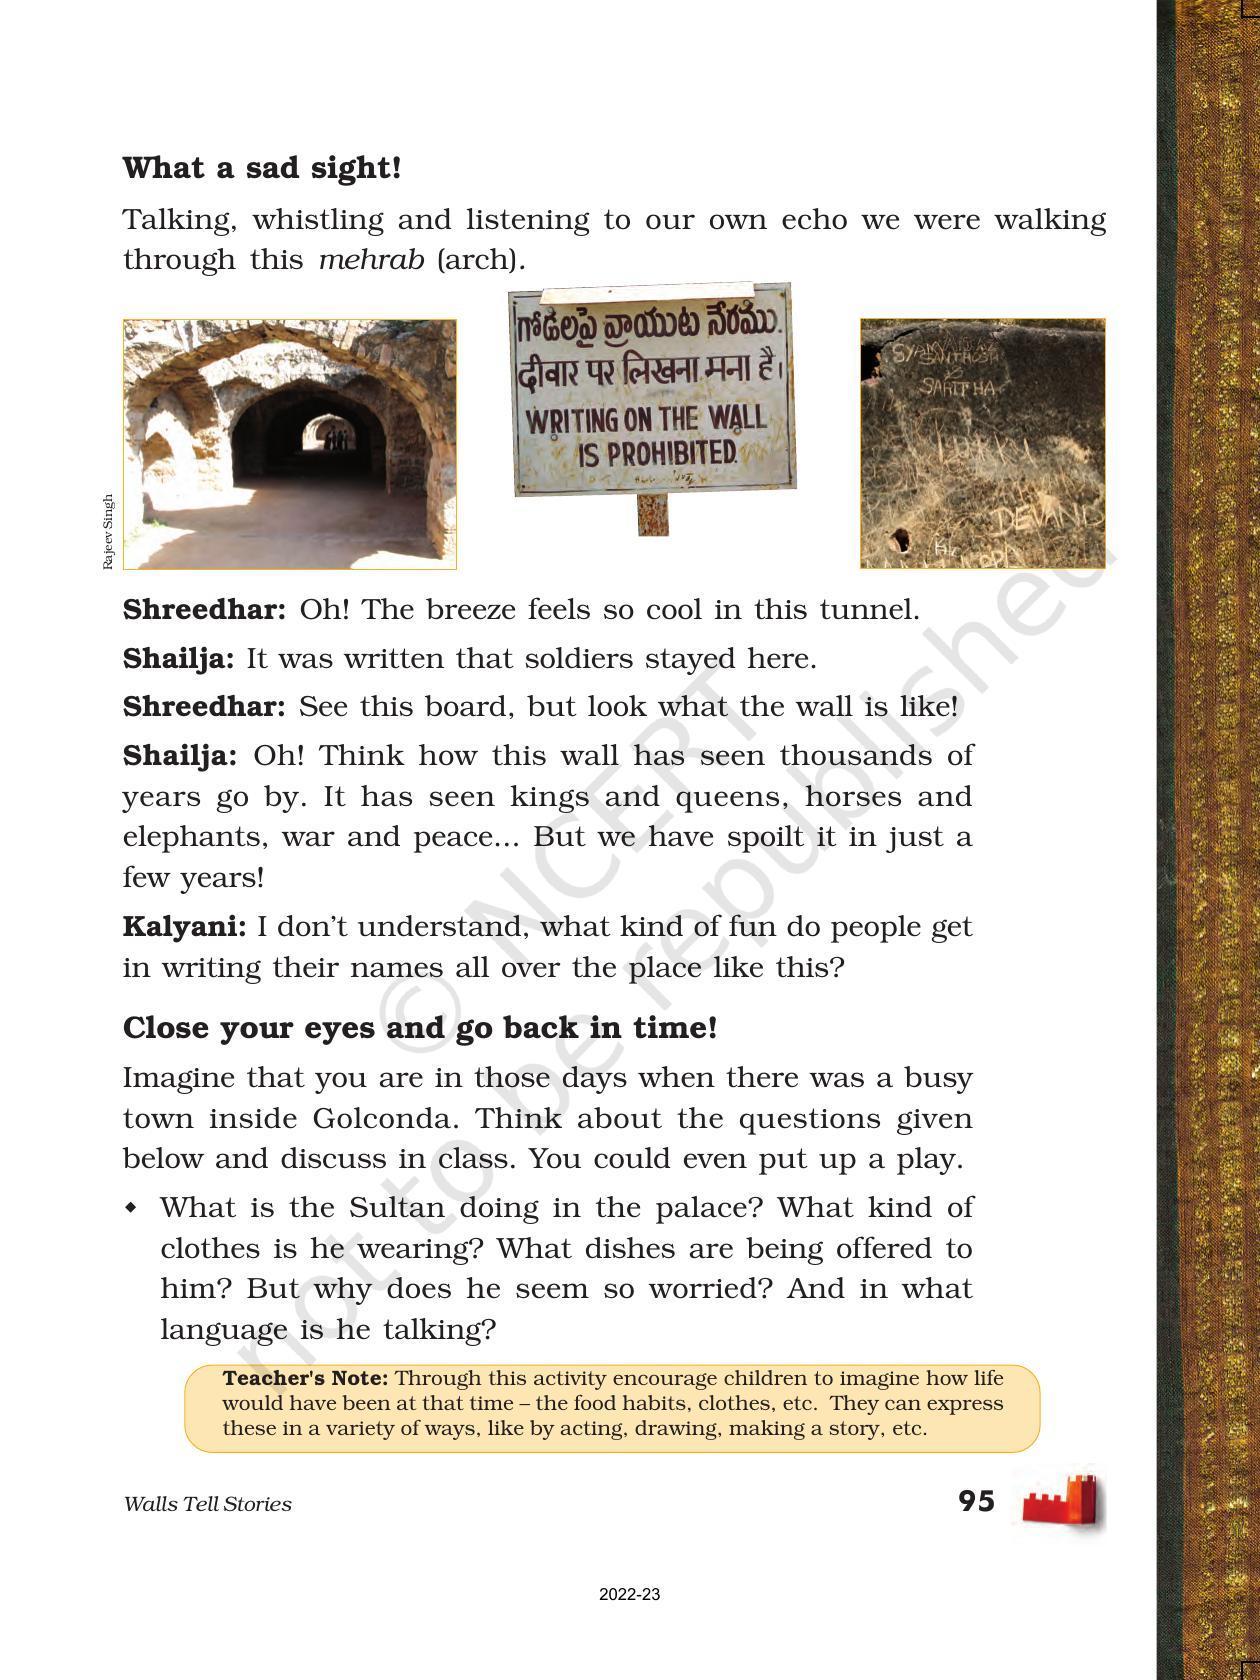 NCERT Book for Class 5 EVS Chapter 10 Walls Tell Stories - Page 9